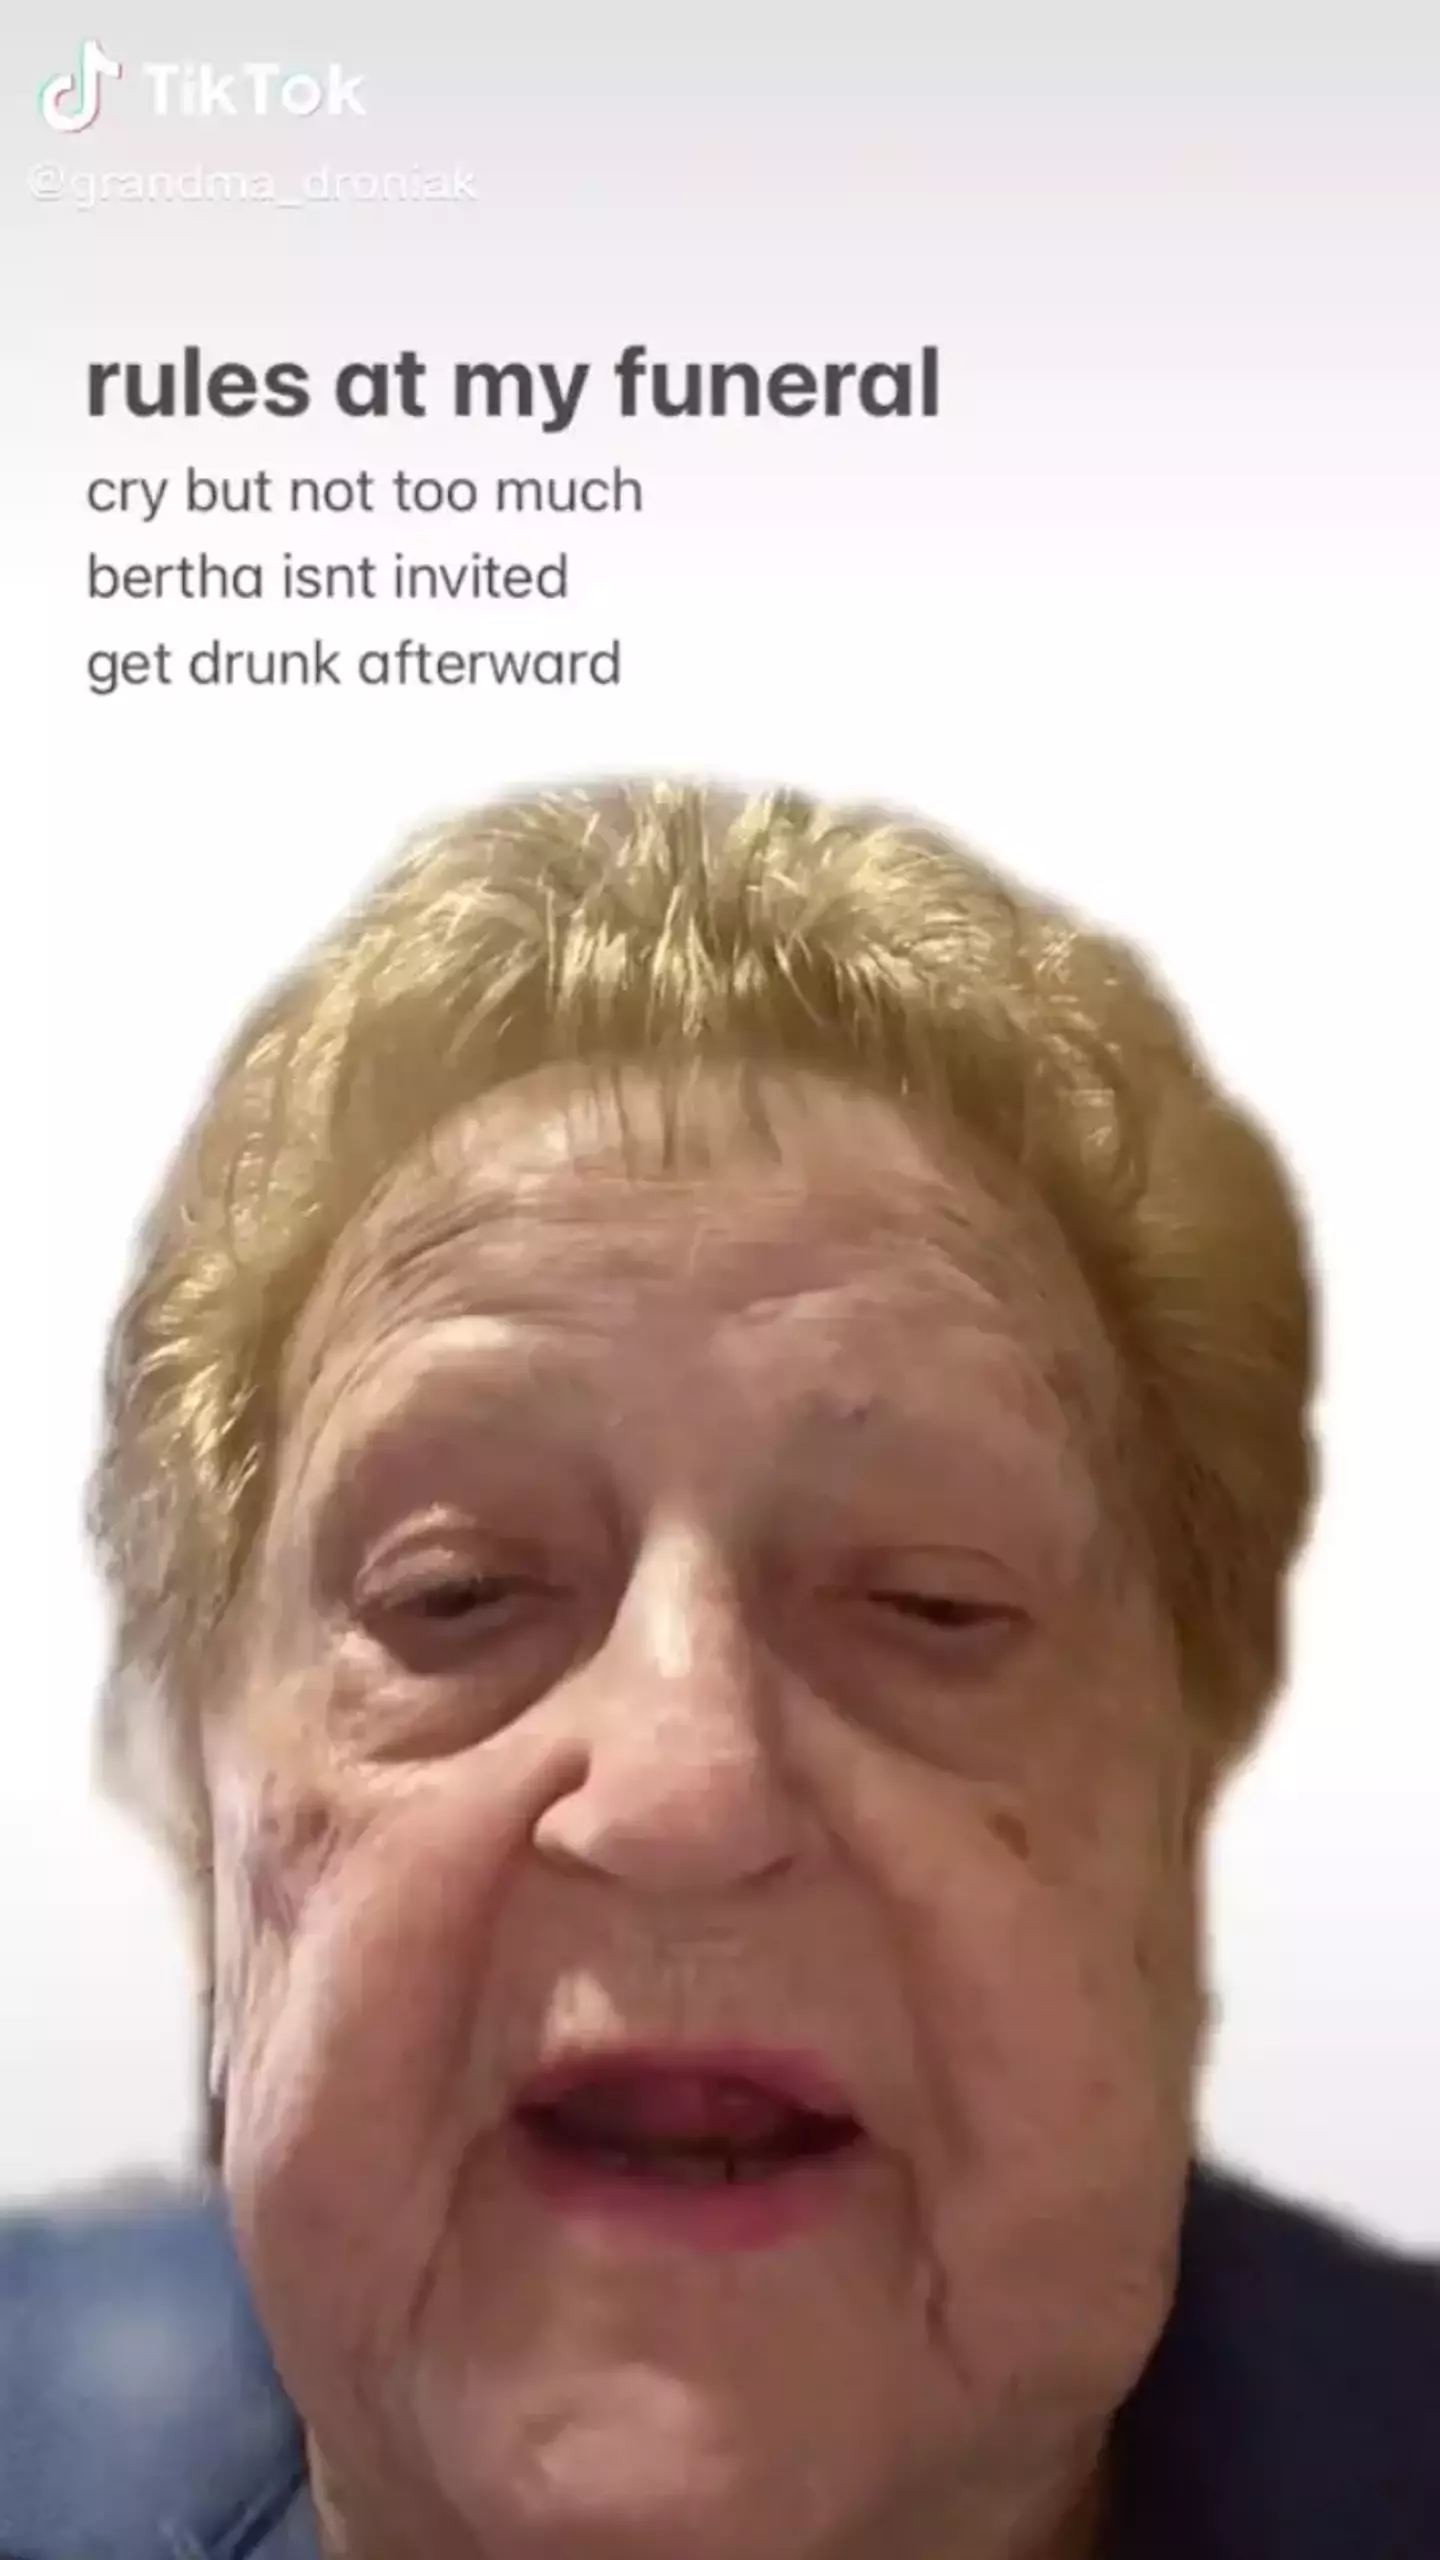 She previously shared the 'rules' for her funeral. TikTok/@grandma_droniak